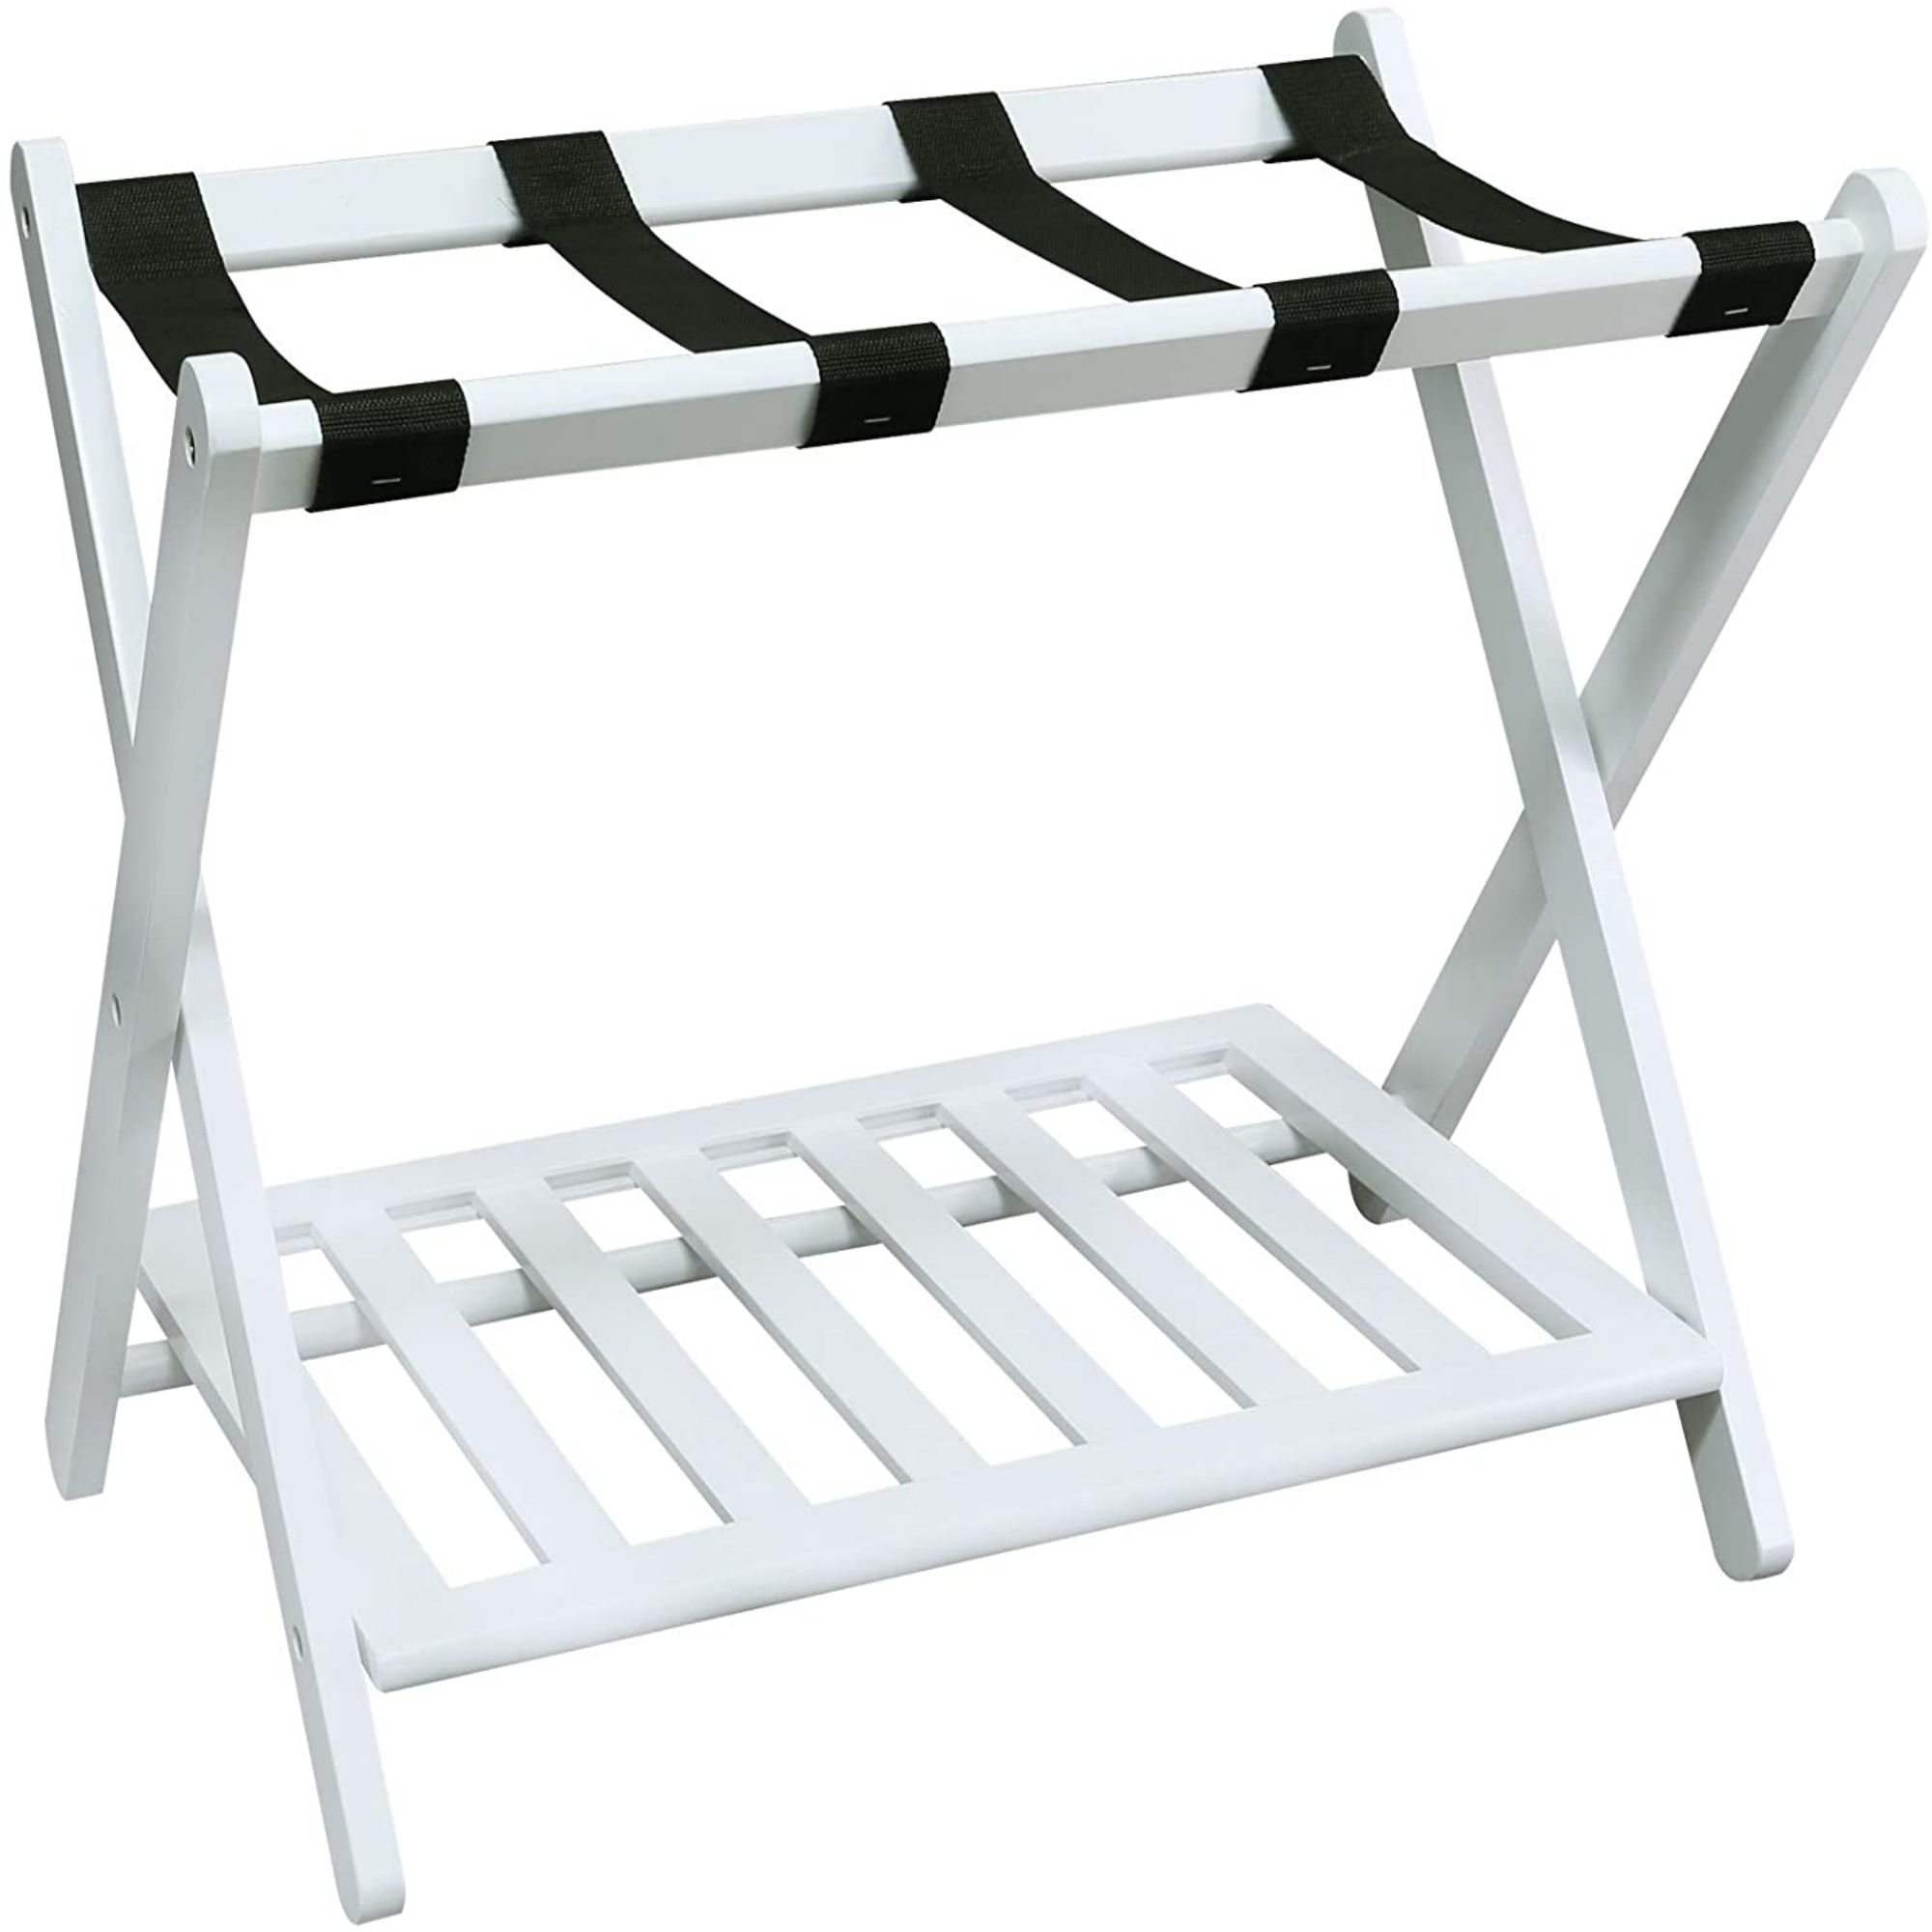 SONGMICS Luggage Racks Pack of 2 for Guest Room Suitcase Stand for